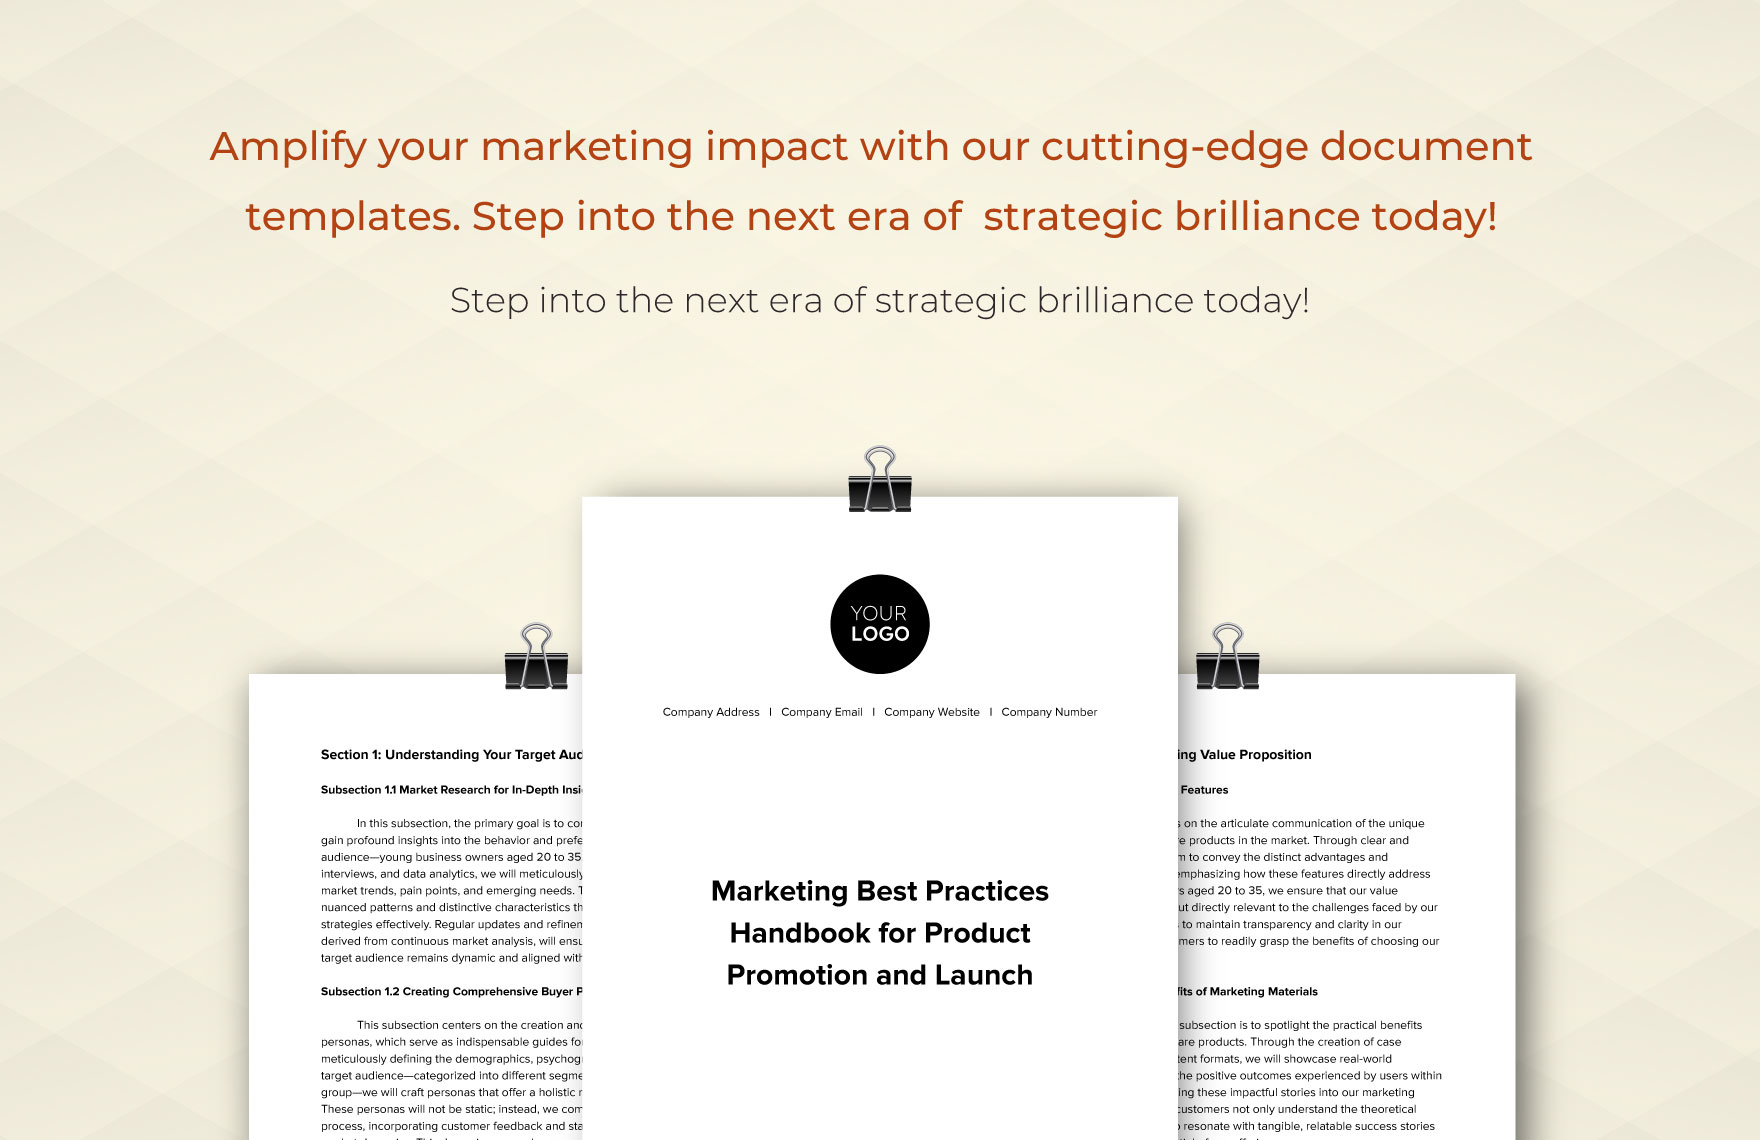 Marketing Best Practices Handbook for Product Promotion and Launch Template